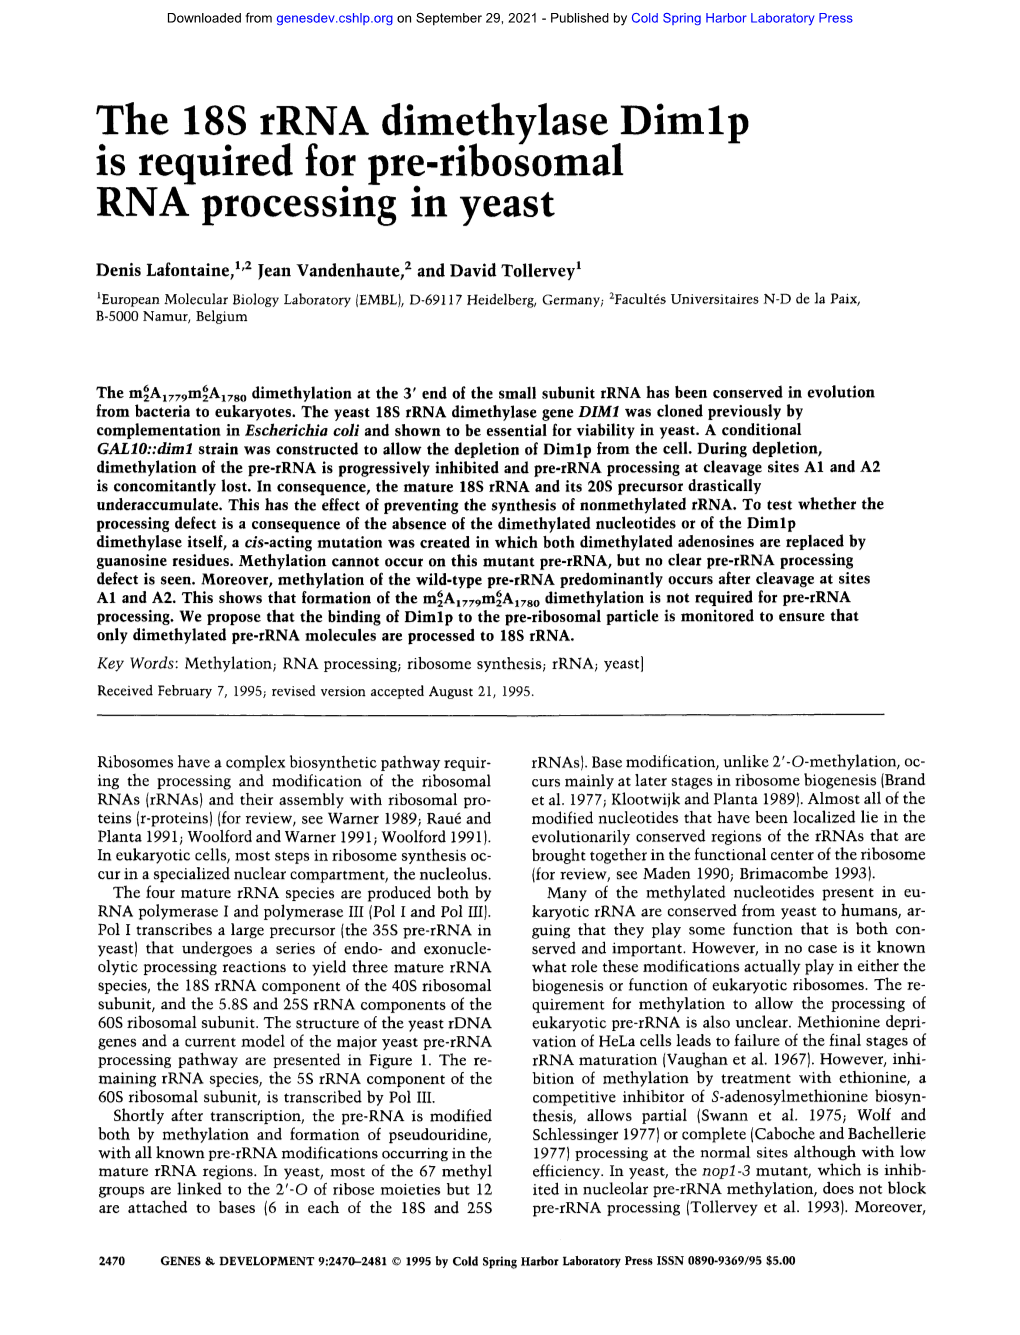 The 18S Rrna Dimethvlase D I M L ~ Is Required for Pre-Ribo~Omal RNA